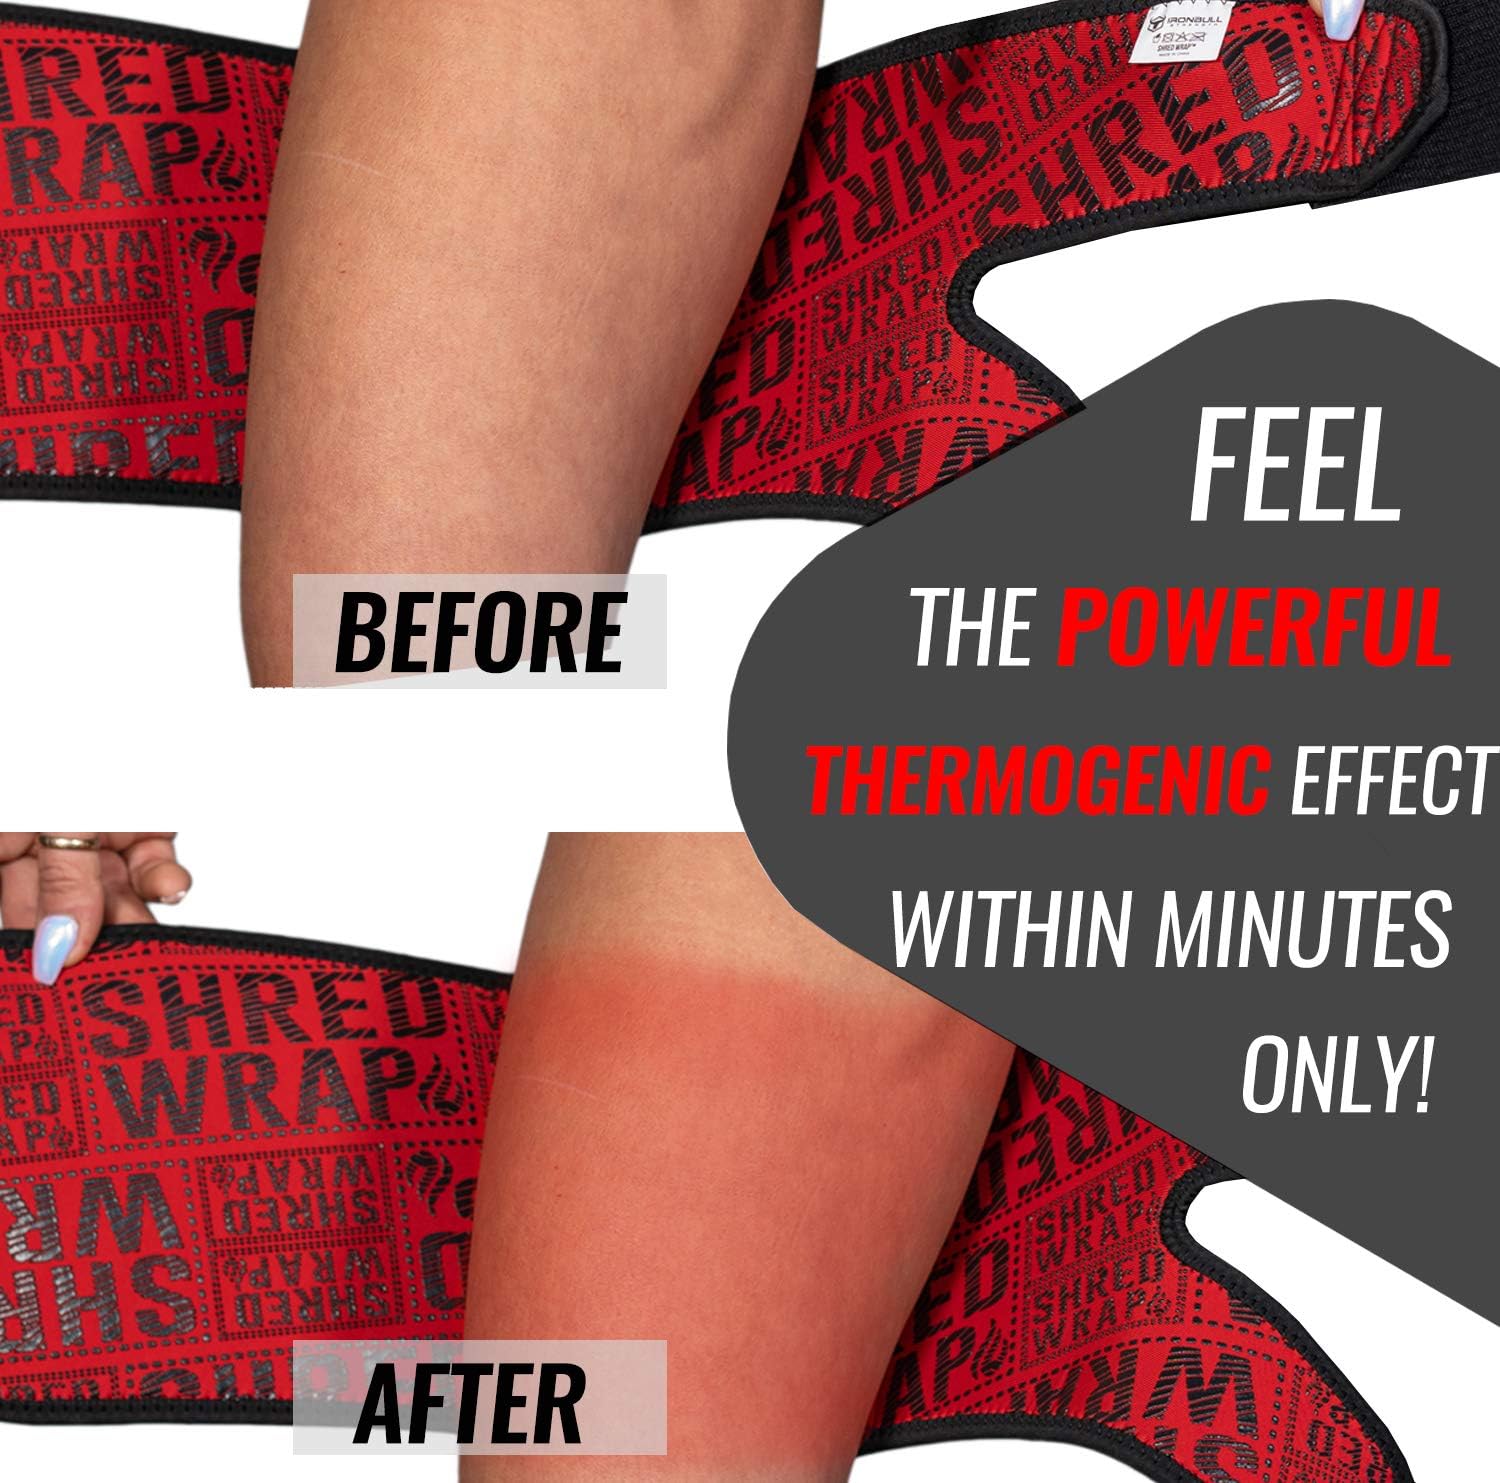 Iron Bull Strength Shred Wraps Review